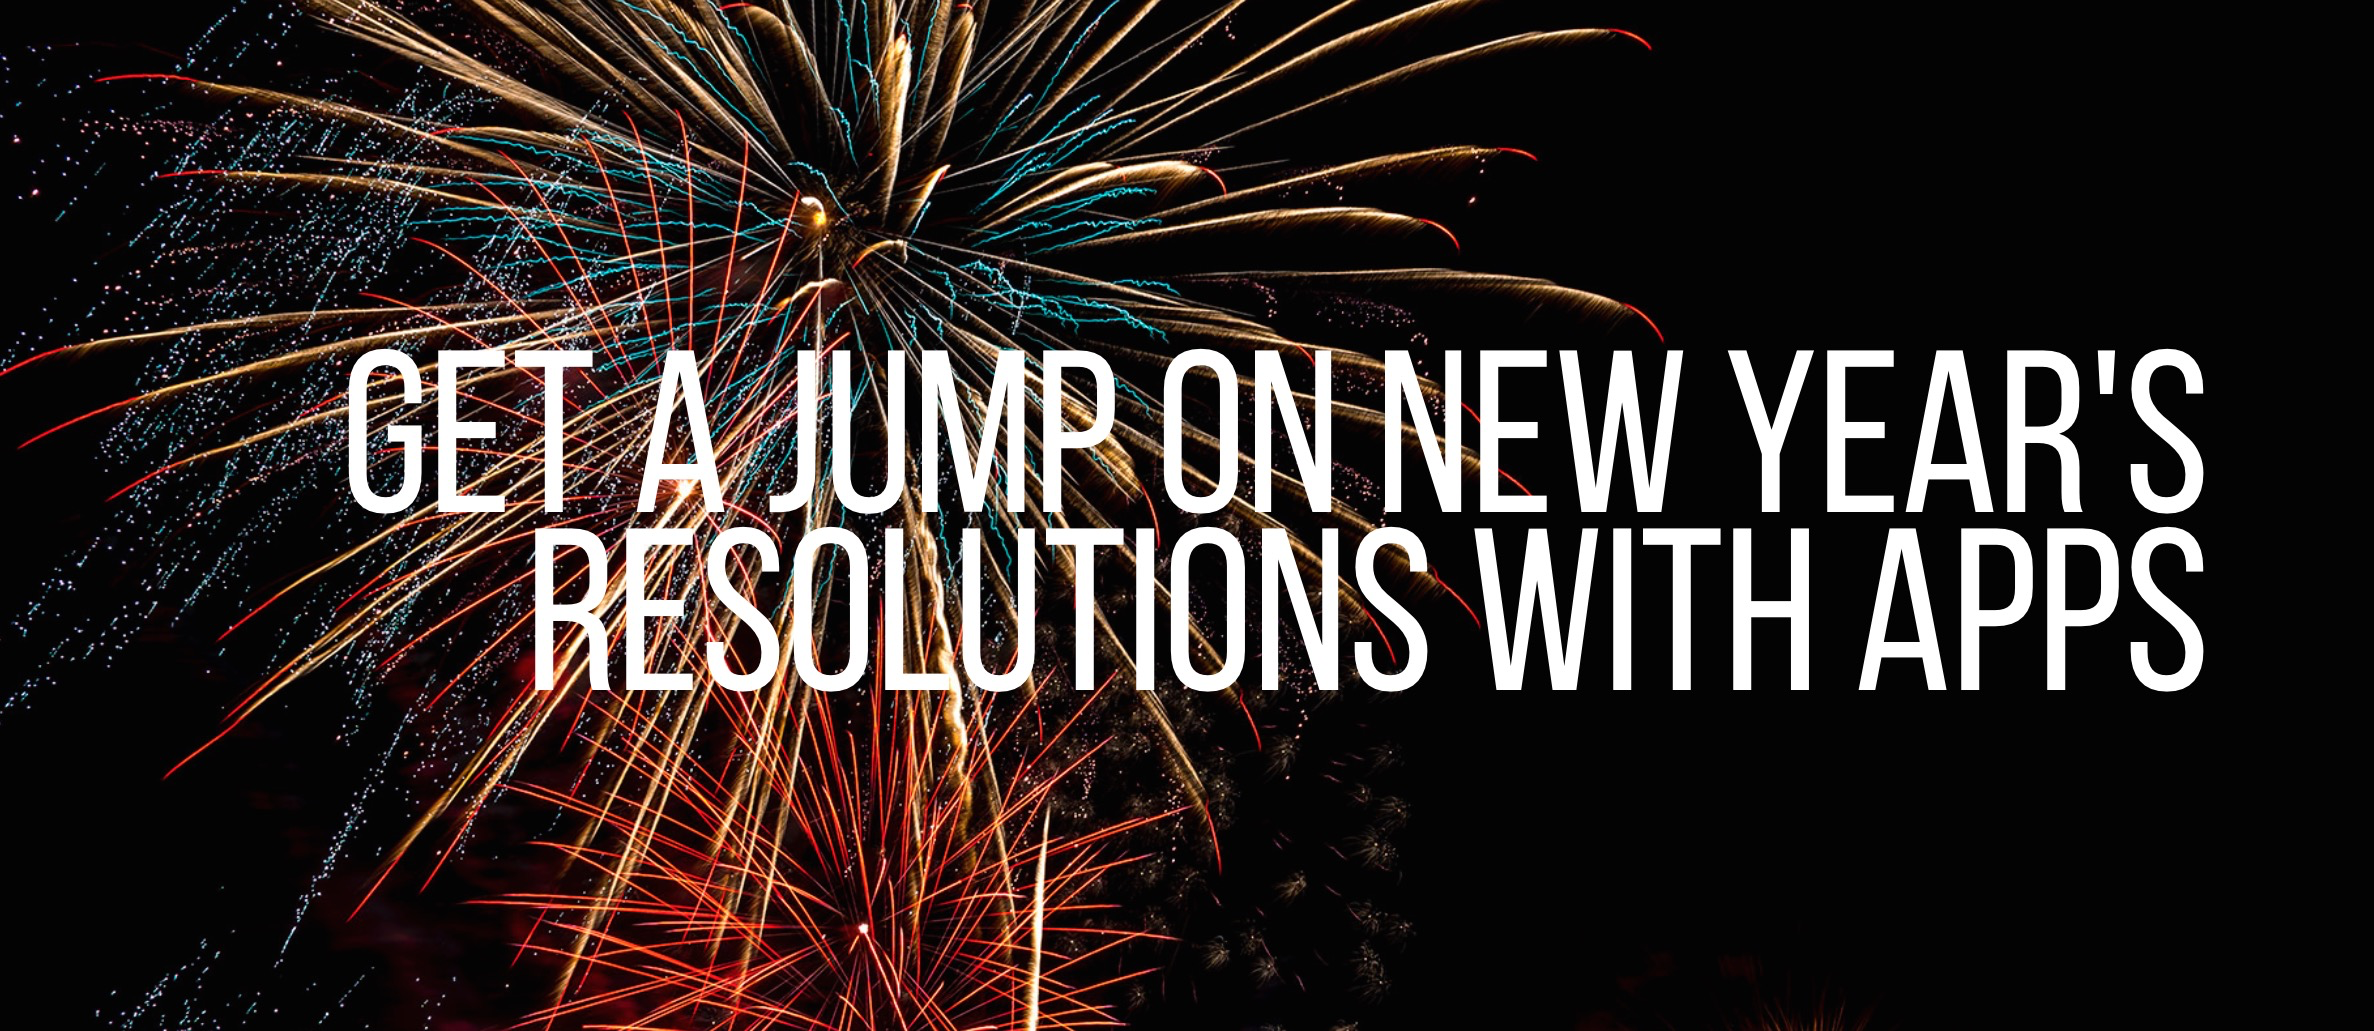 New Year resolutions apps